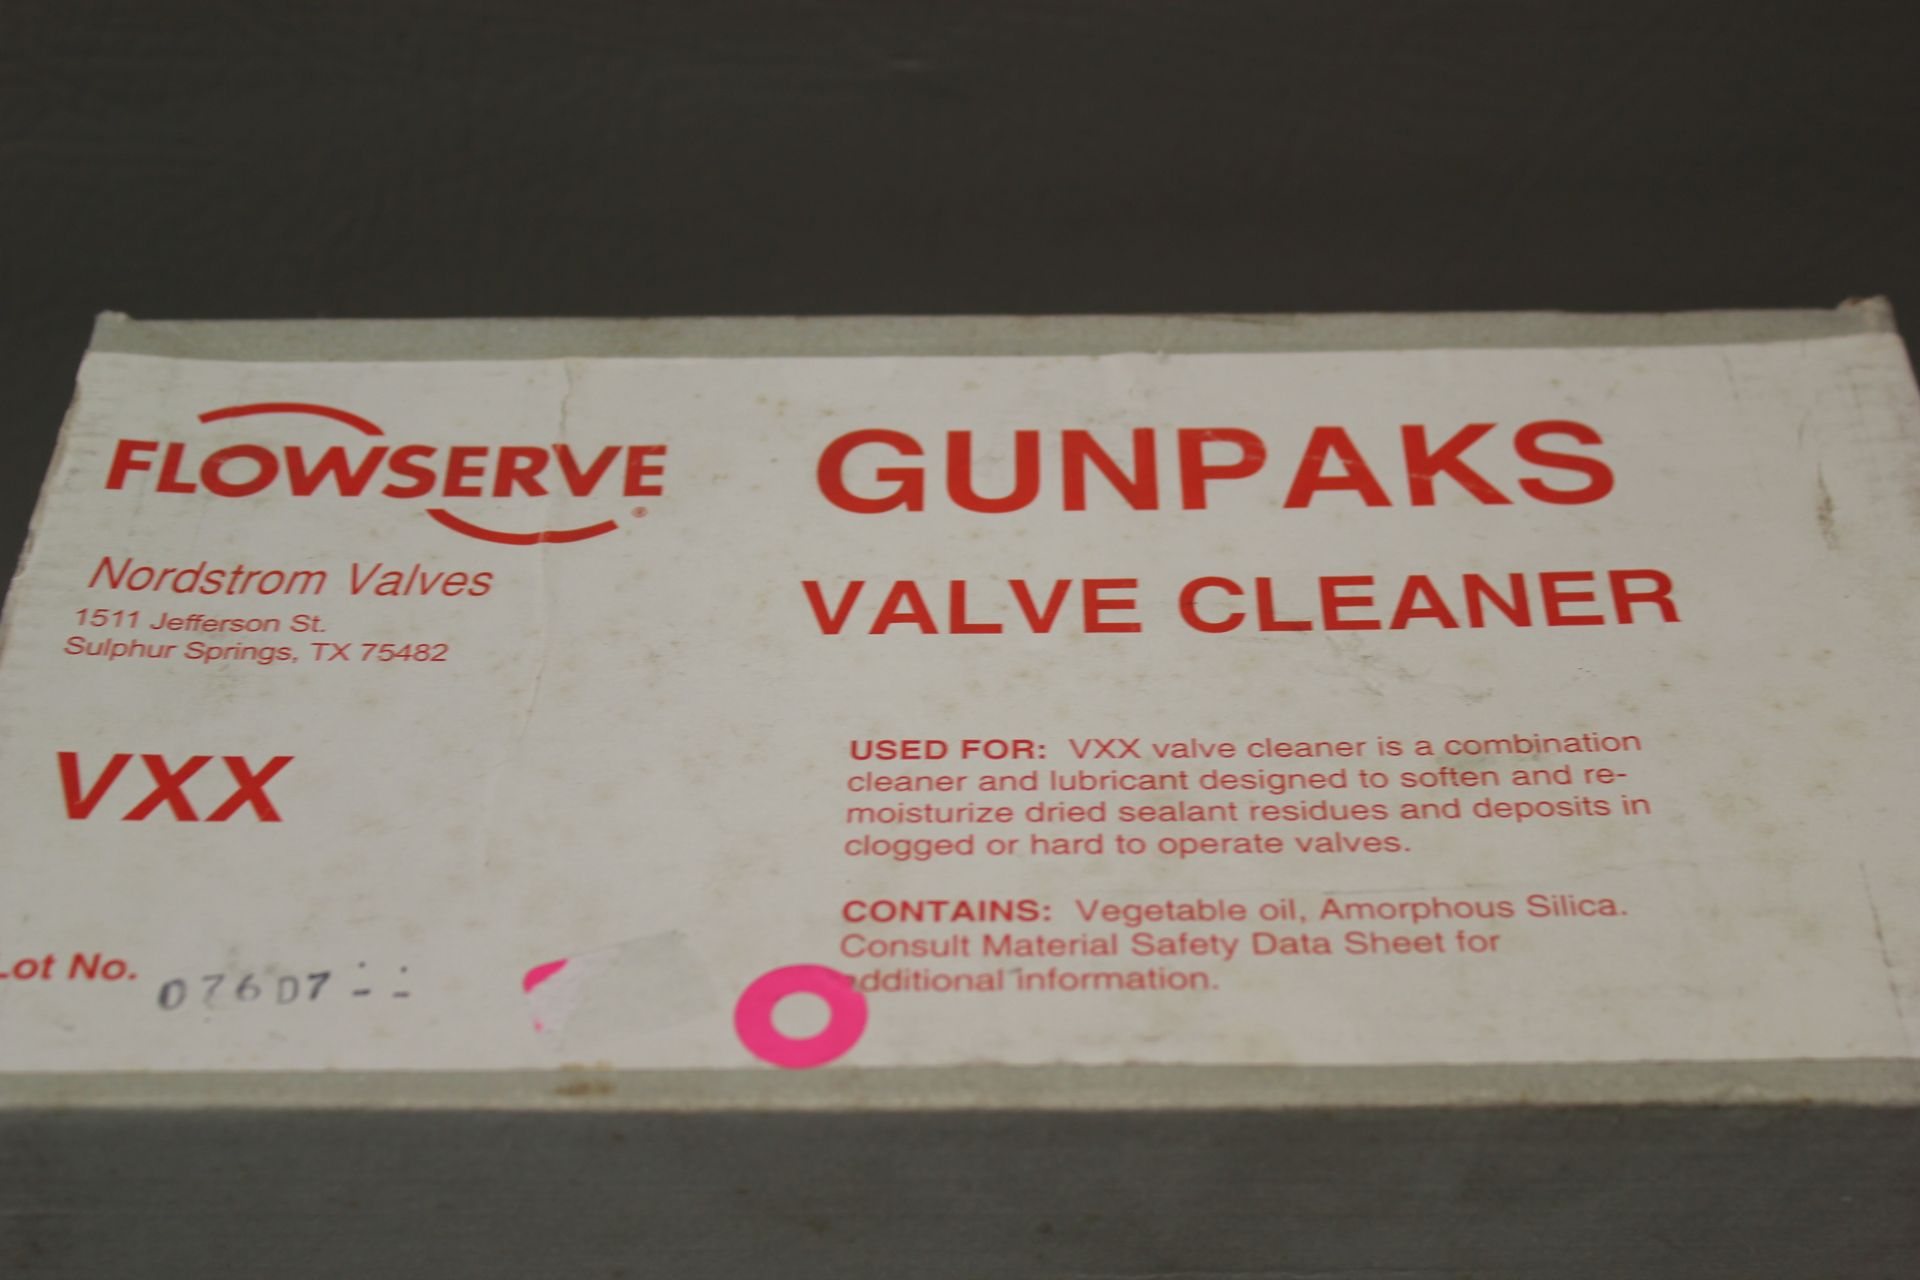 LOT OF 2 NEW FLOWSERVE GUNPAKS VALVE CLEANERS - Image 2 of 2